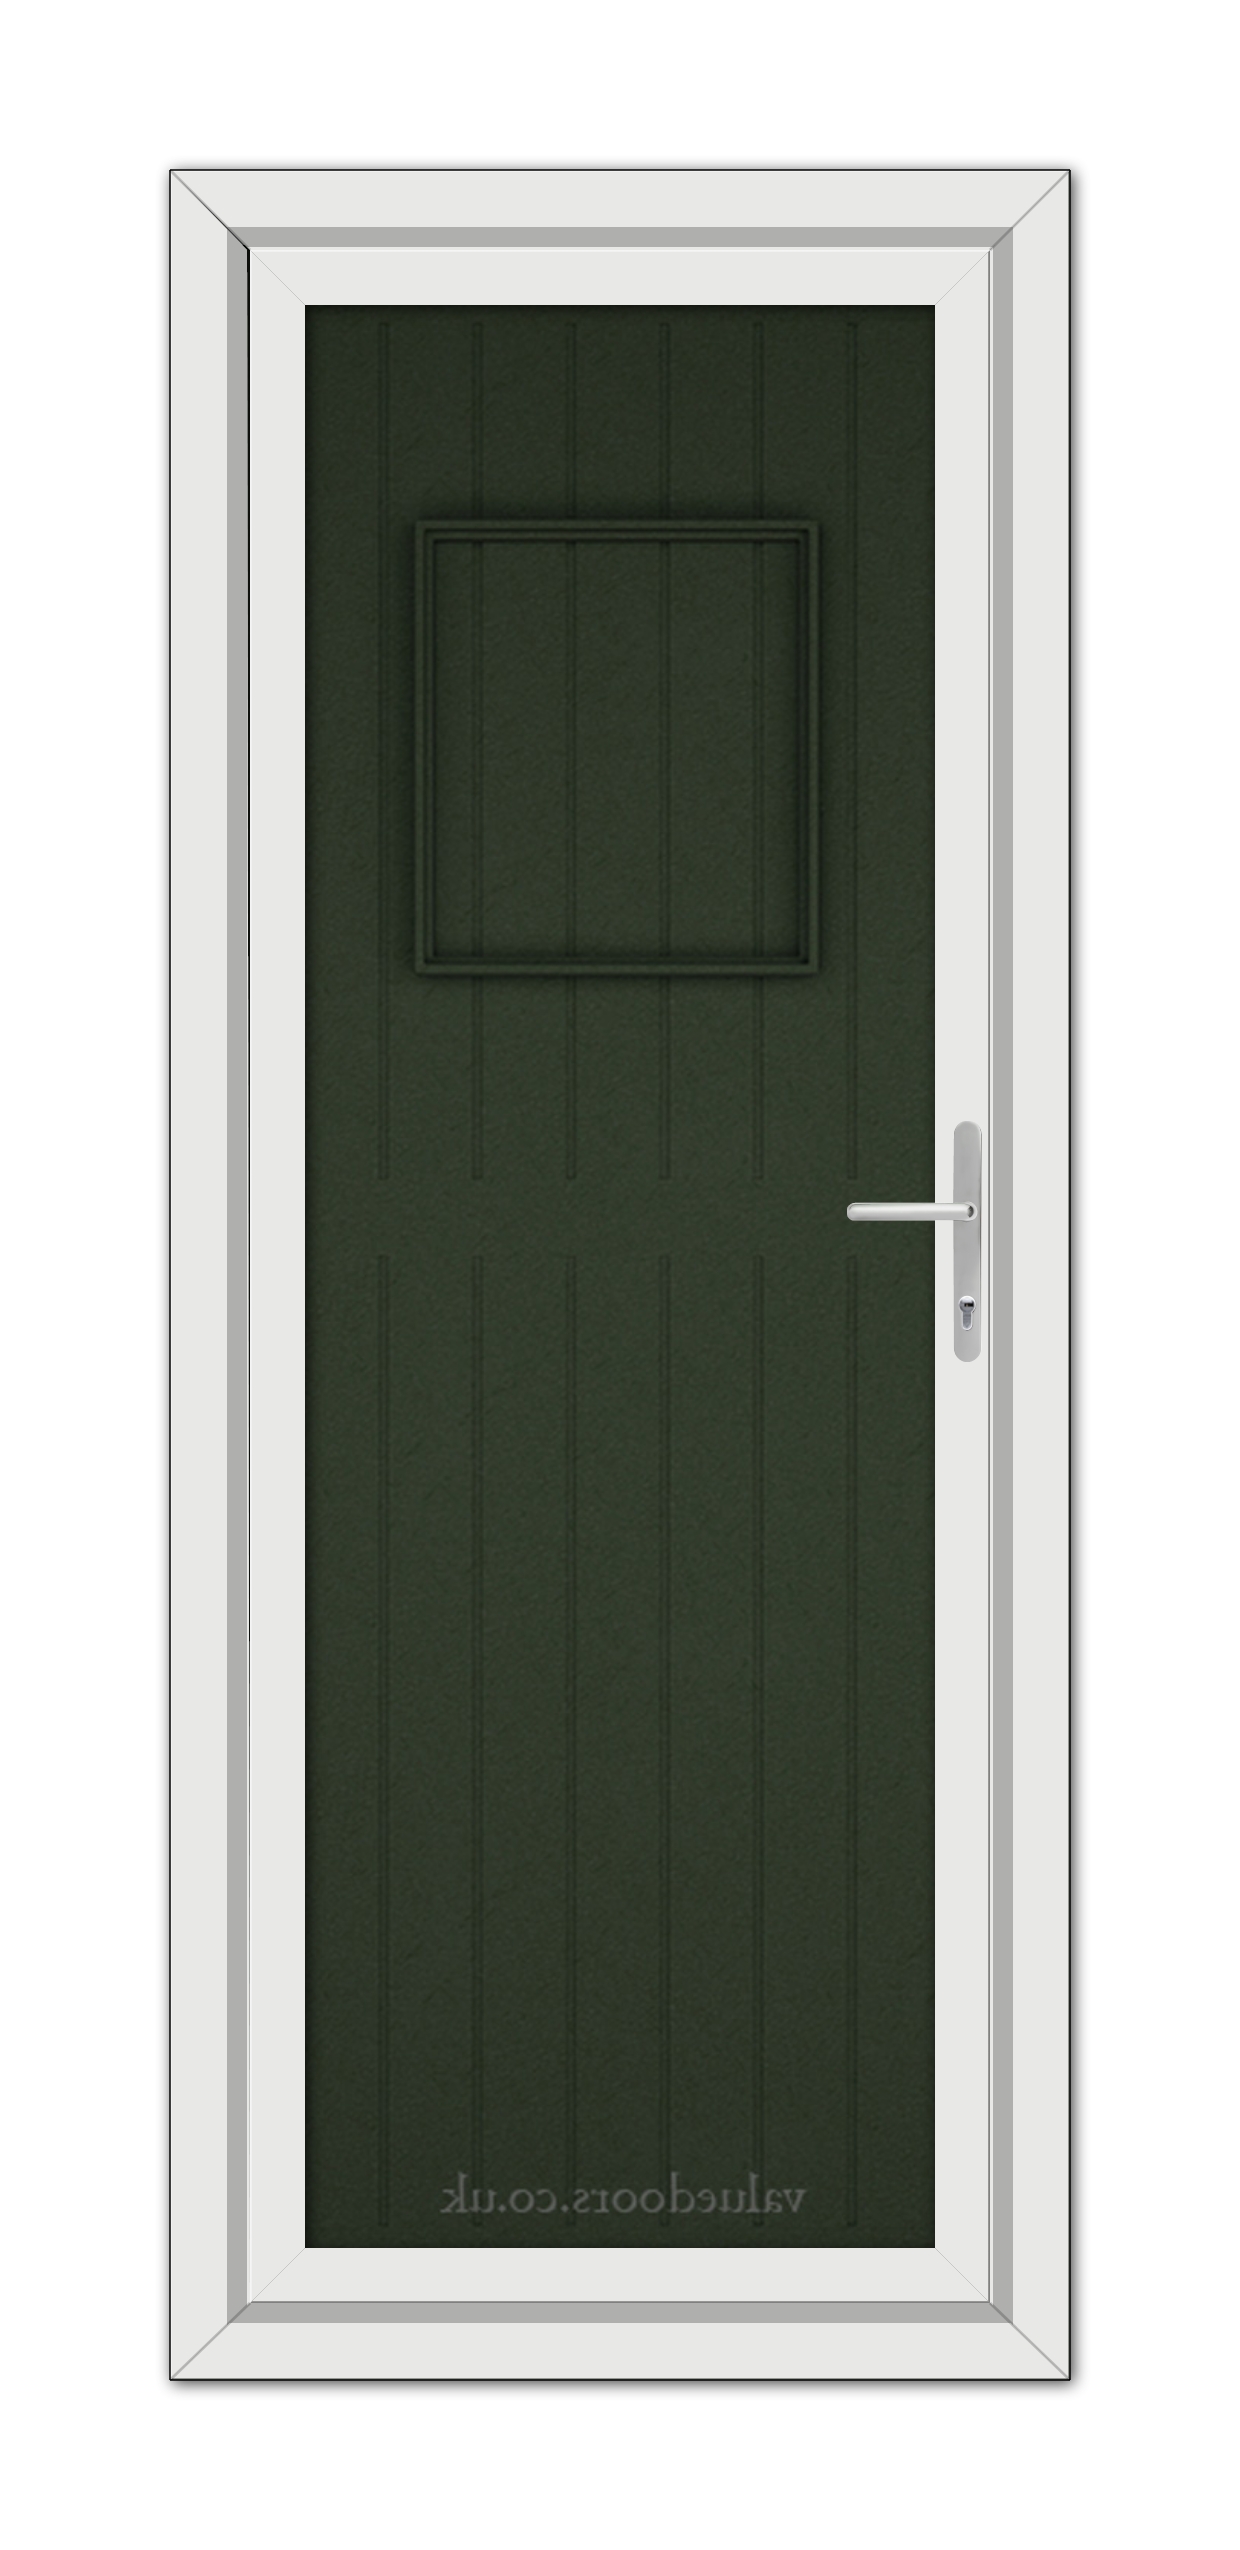 A Green Chatsworth Solid uPVC Door with a white frame.